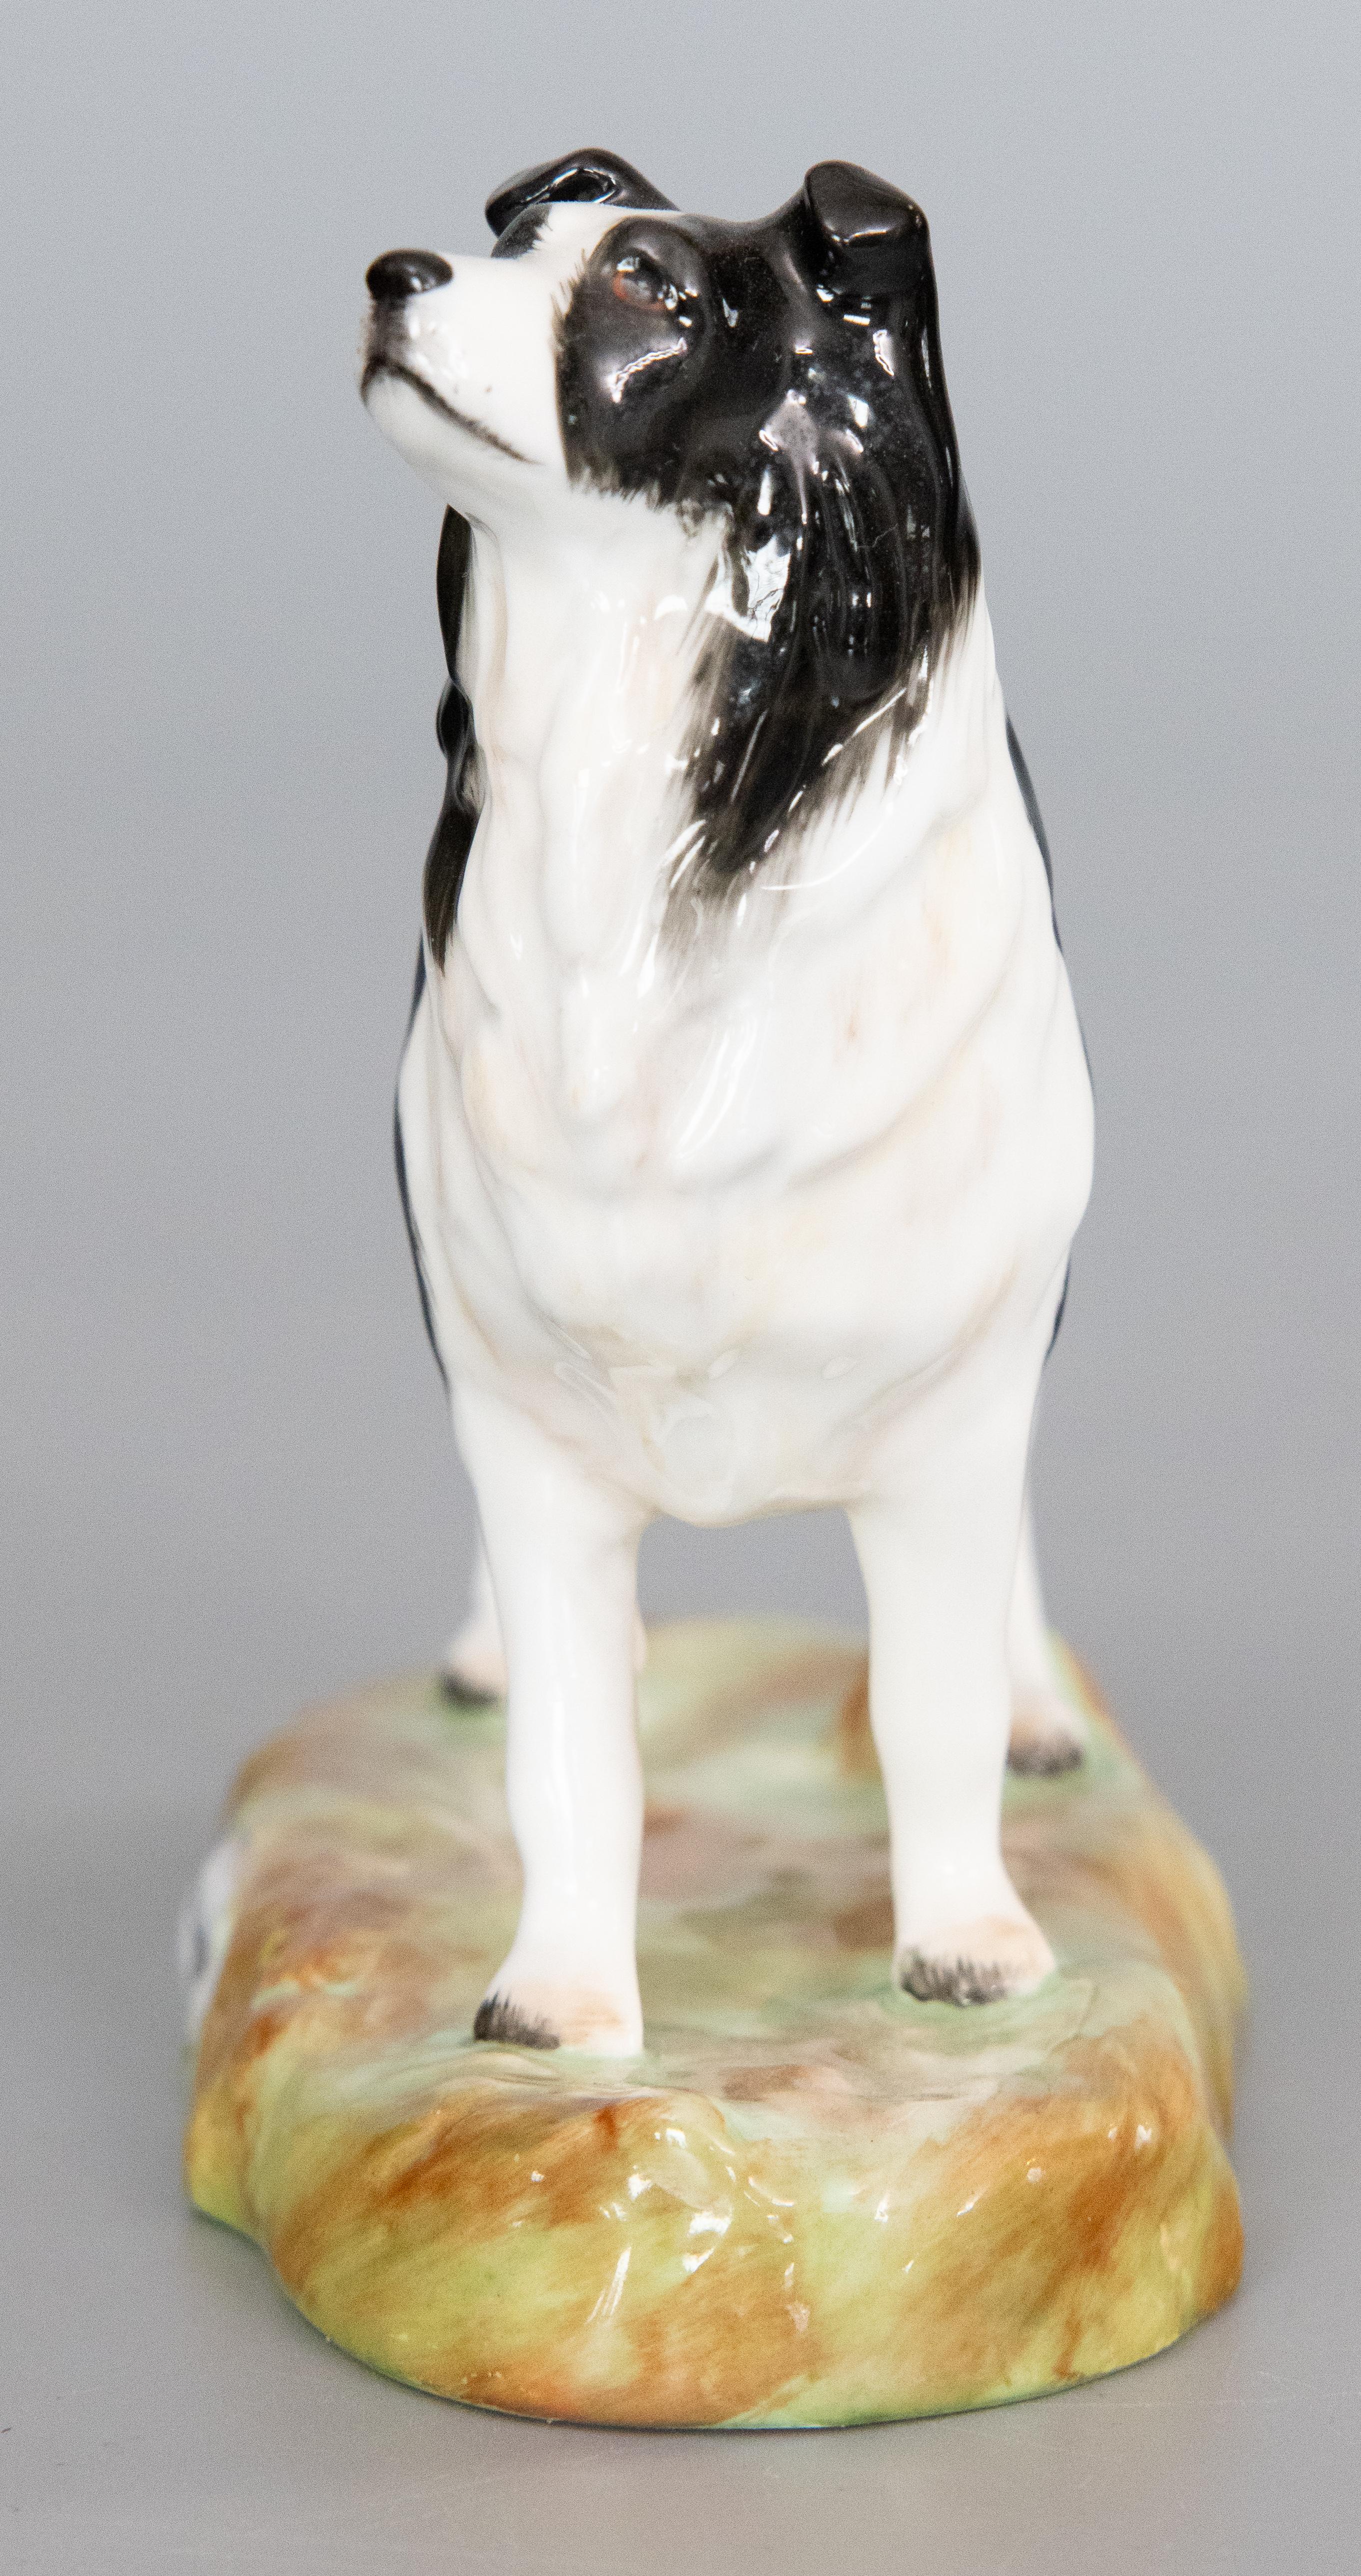 A rare vintage English Royale Stratford Staffordshire porcelain border collie dog figurine, circa 1950. Maker's mark on reverse and signed by the artist. This charming fellow is hand painted with fine details and would be perfect for the dog lover